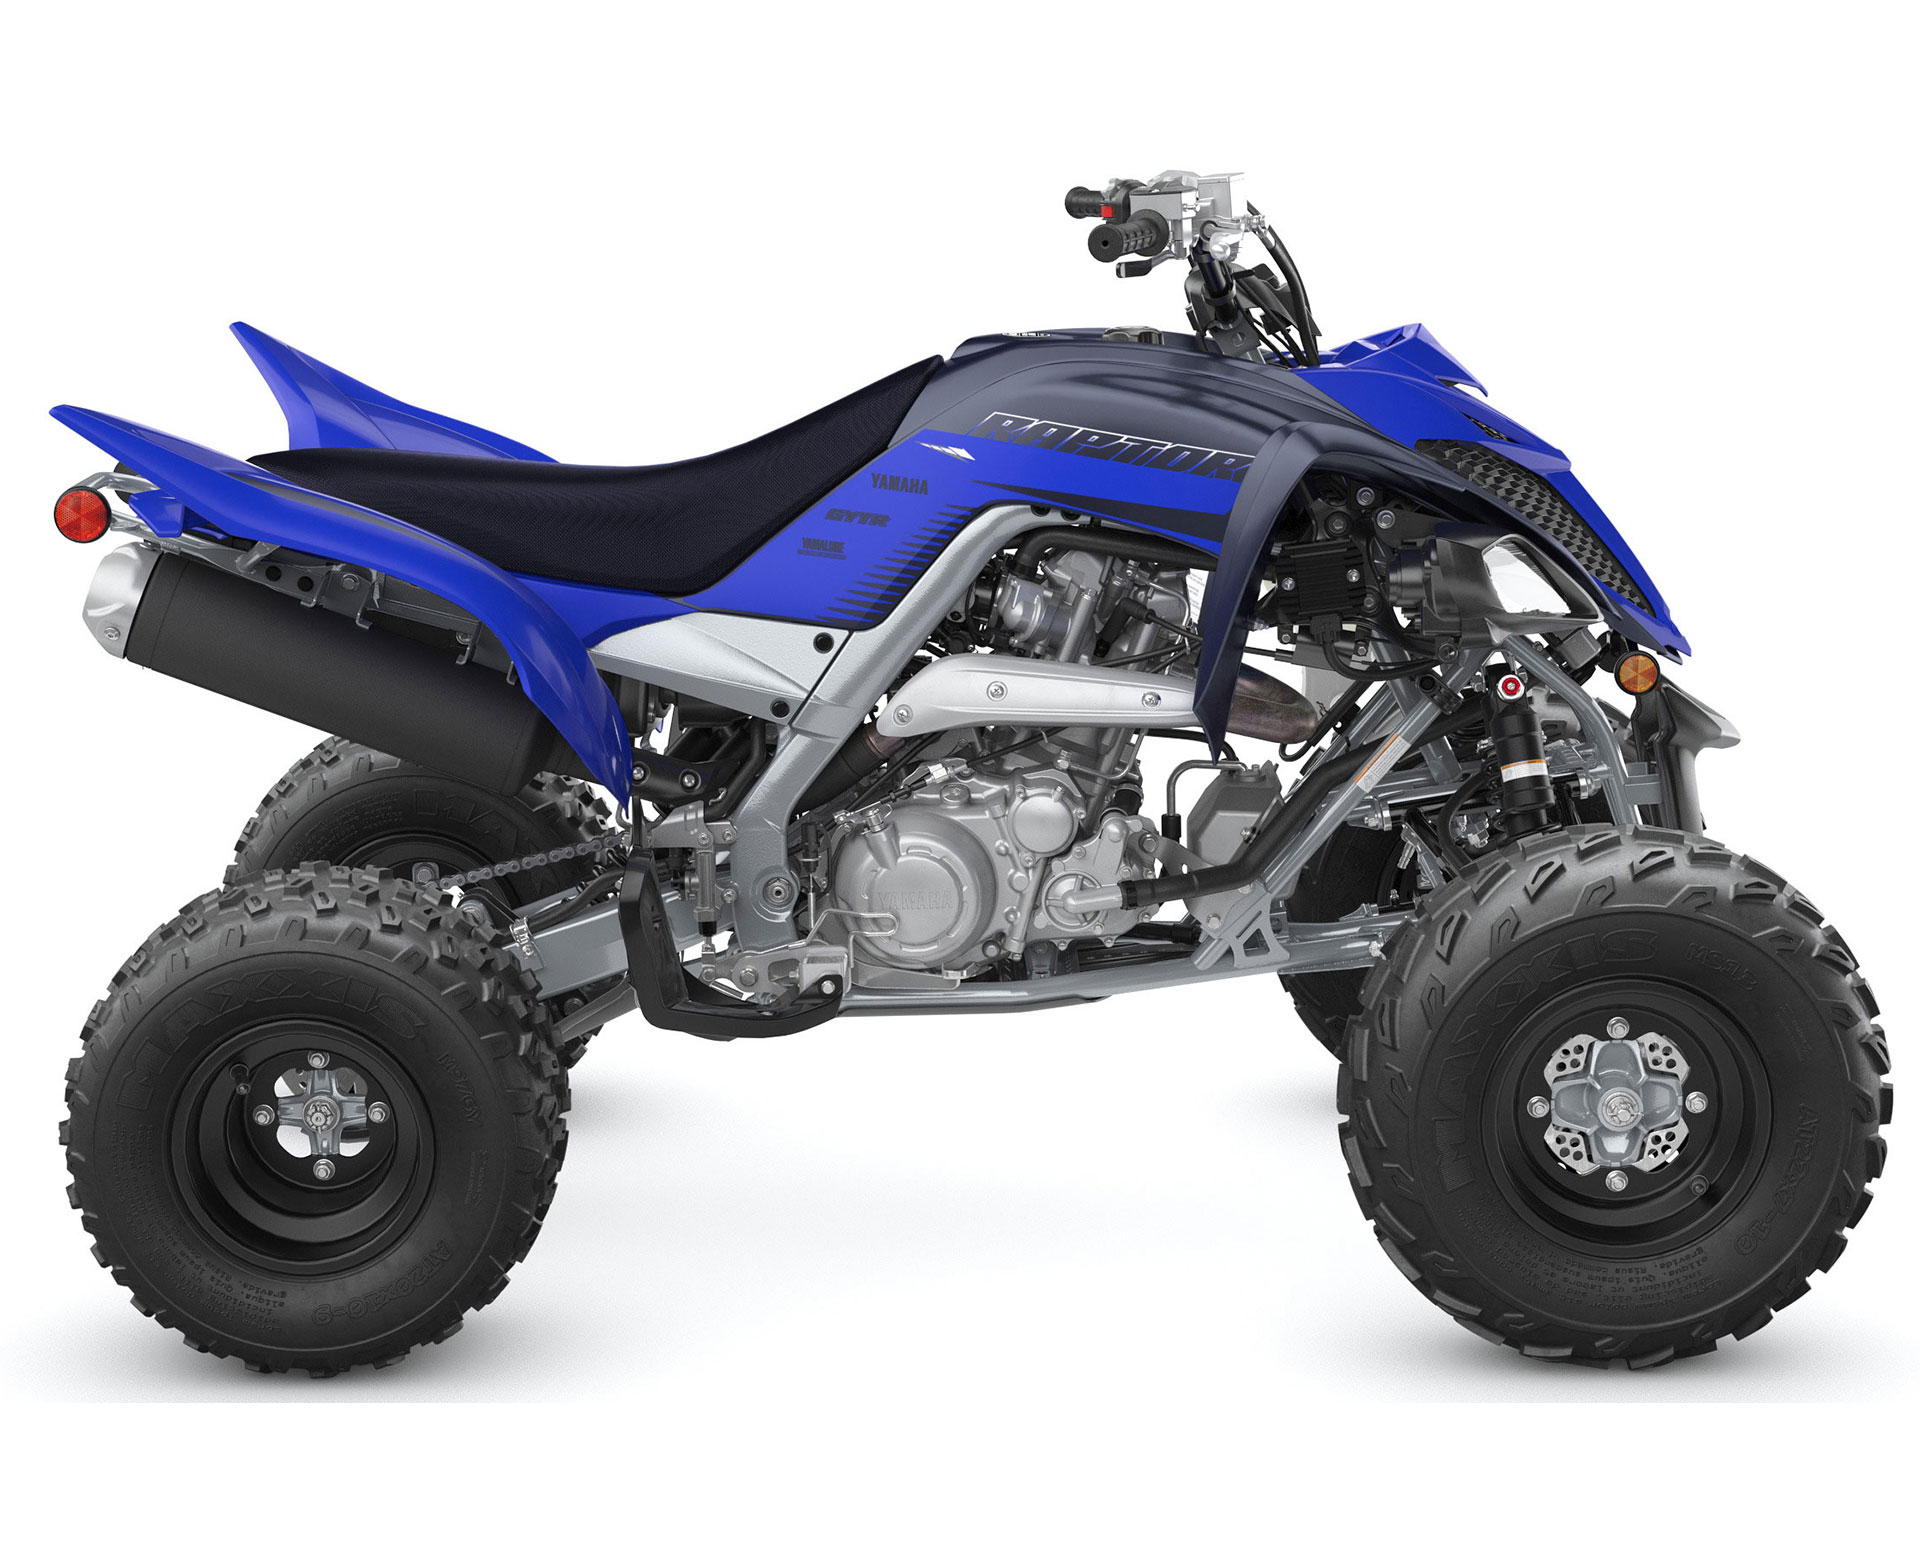 Thumbnail of your customized 2023 Raptor 700R